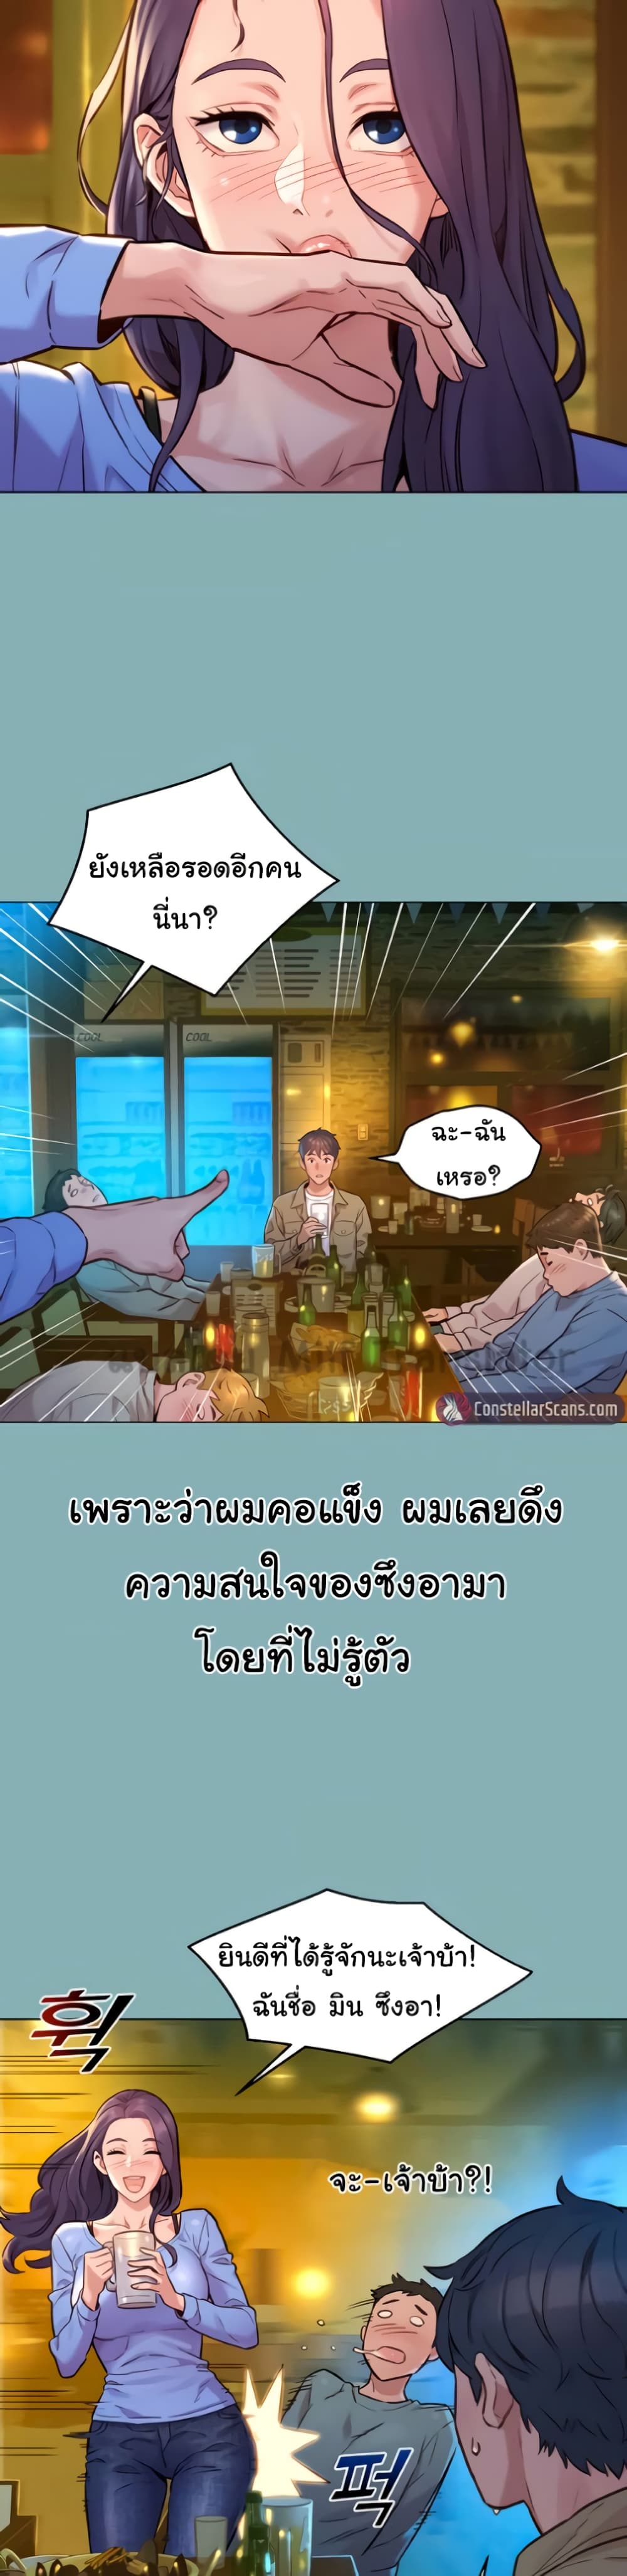 Let’s Hang Out from Today ตอนที่ 1 ภาพ 30